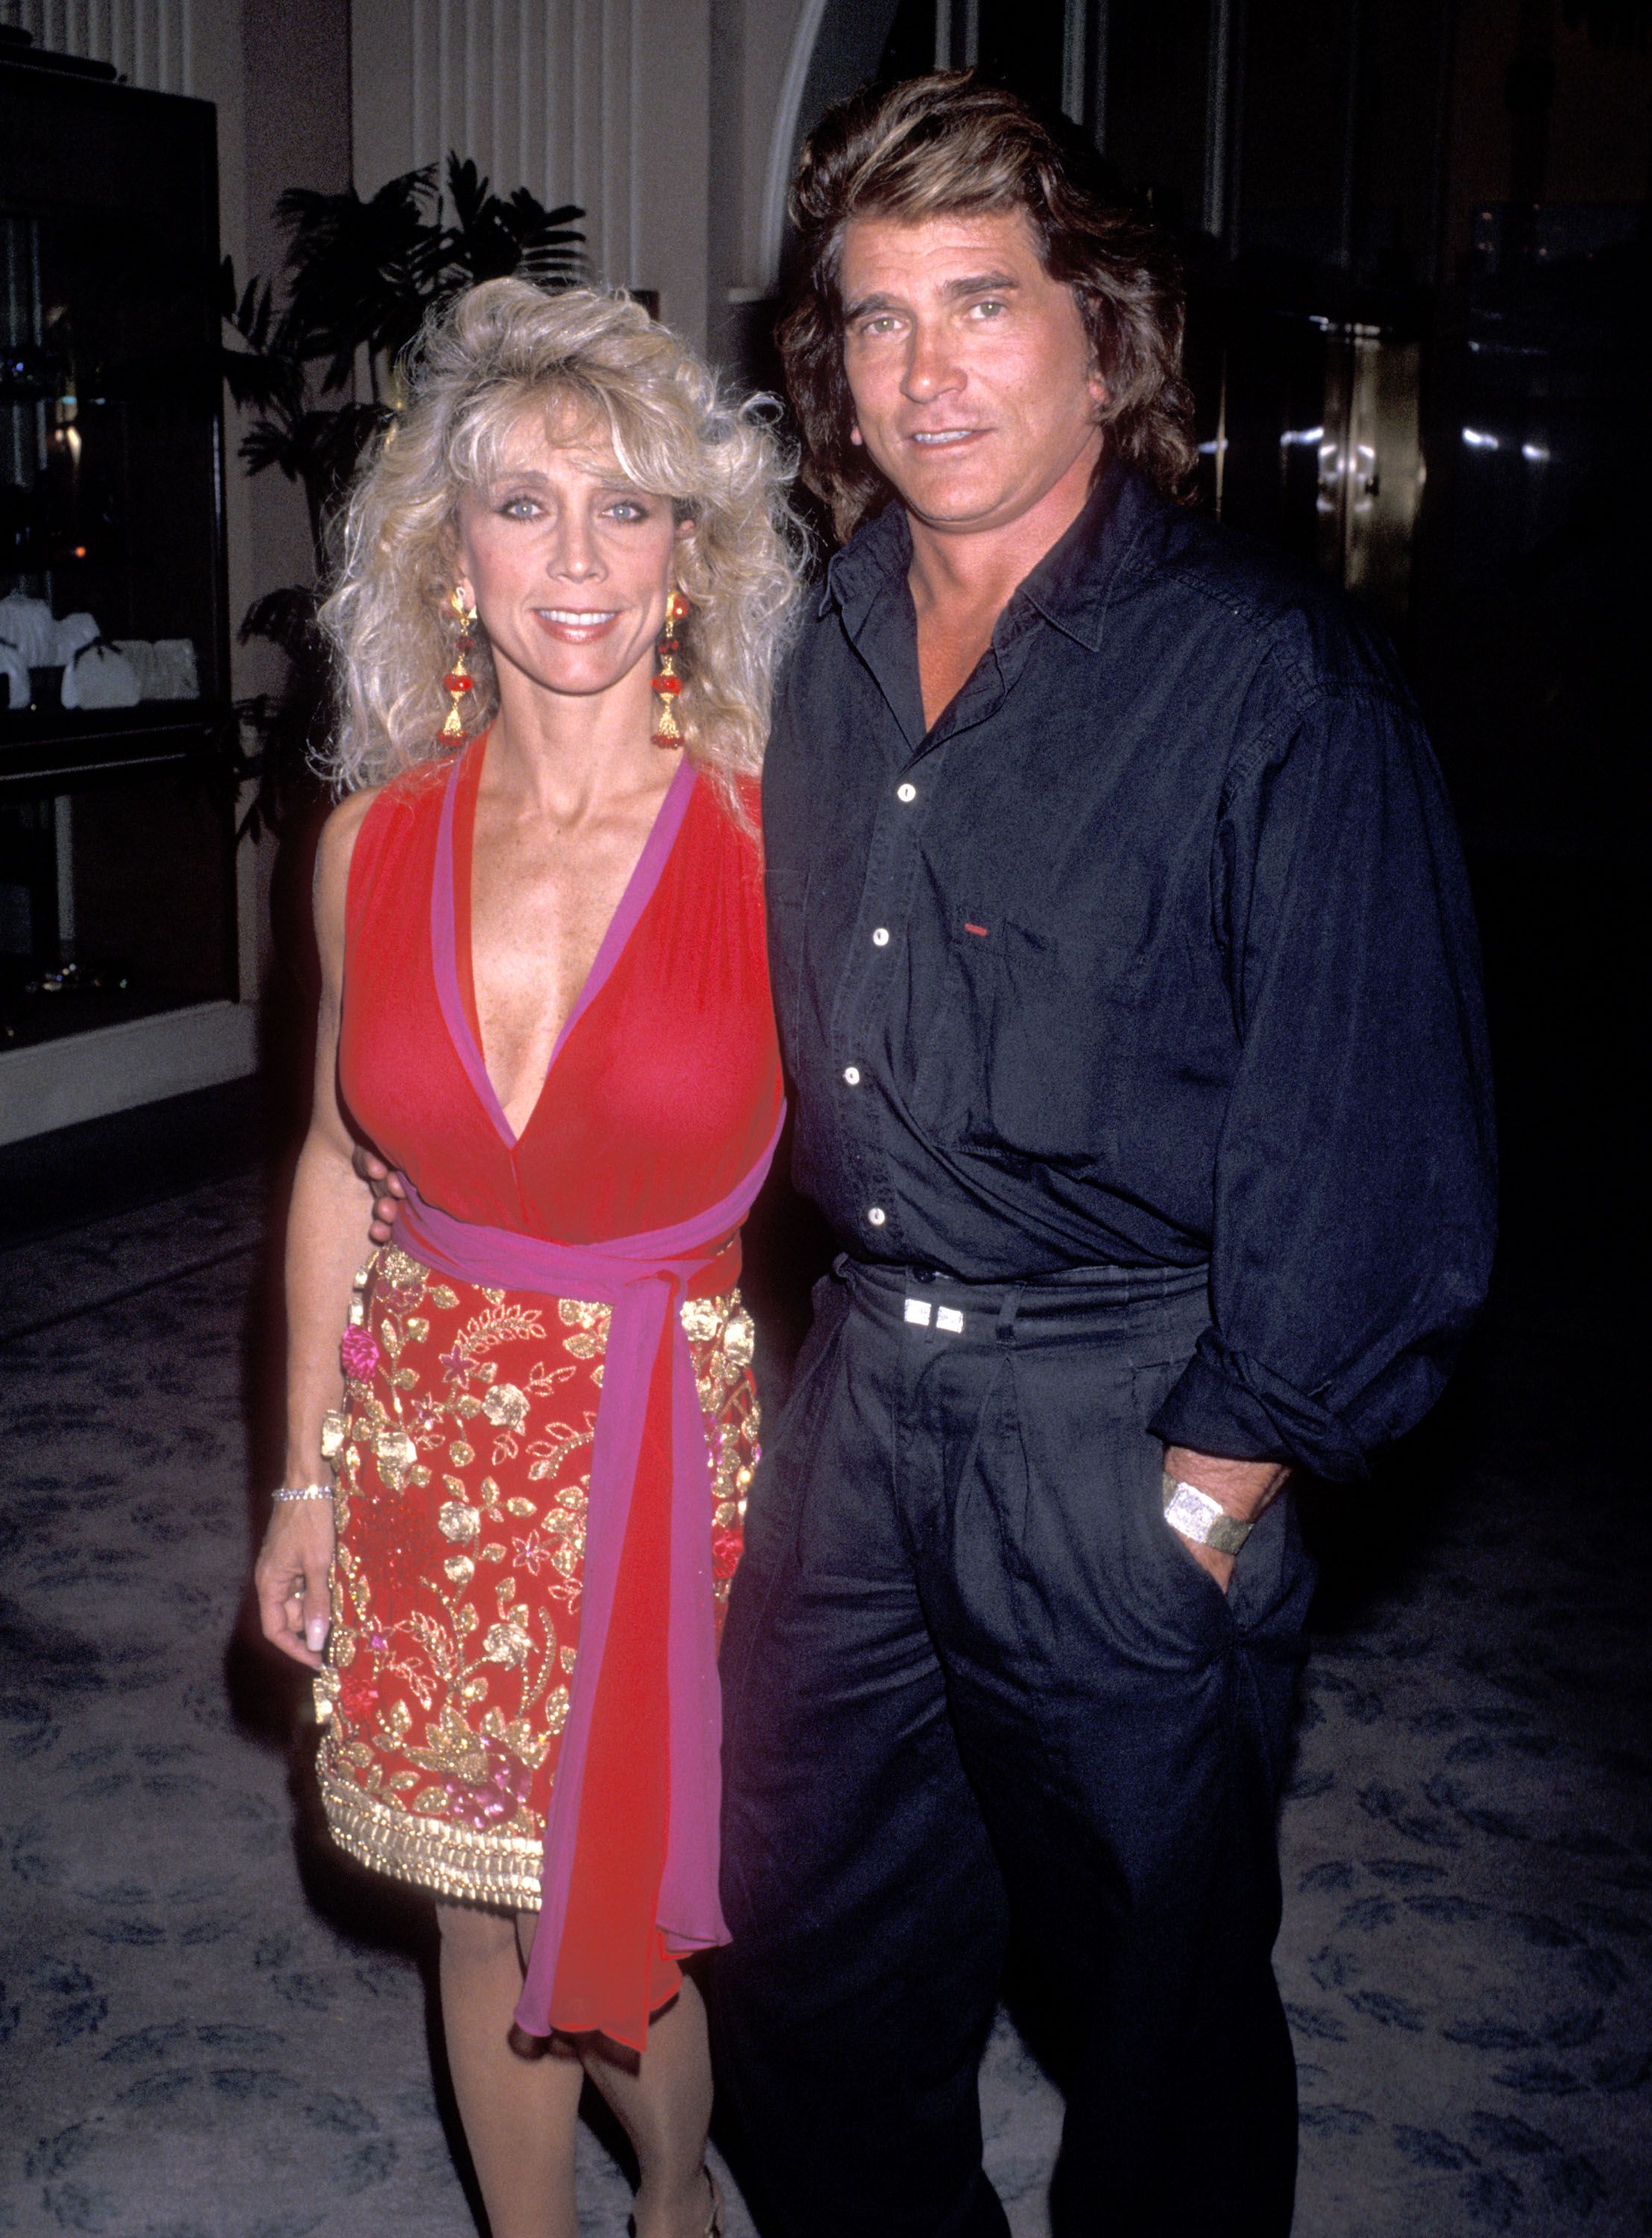 Michael Landon and wife Cindy Landon attend the National Down Syndrome Congress' Third Annual Michael Landon Celebrity Gala on October 20, 1989 at Beverly Hilton Hotel. | Photo: Getty Images.